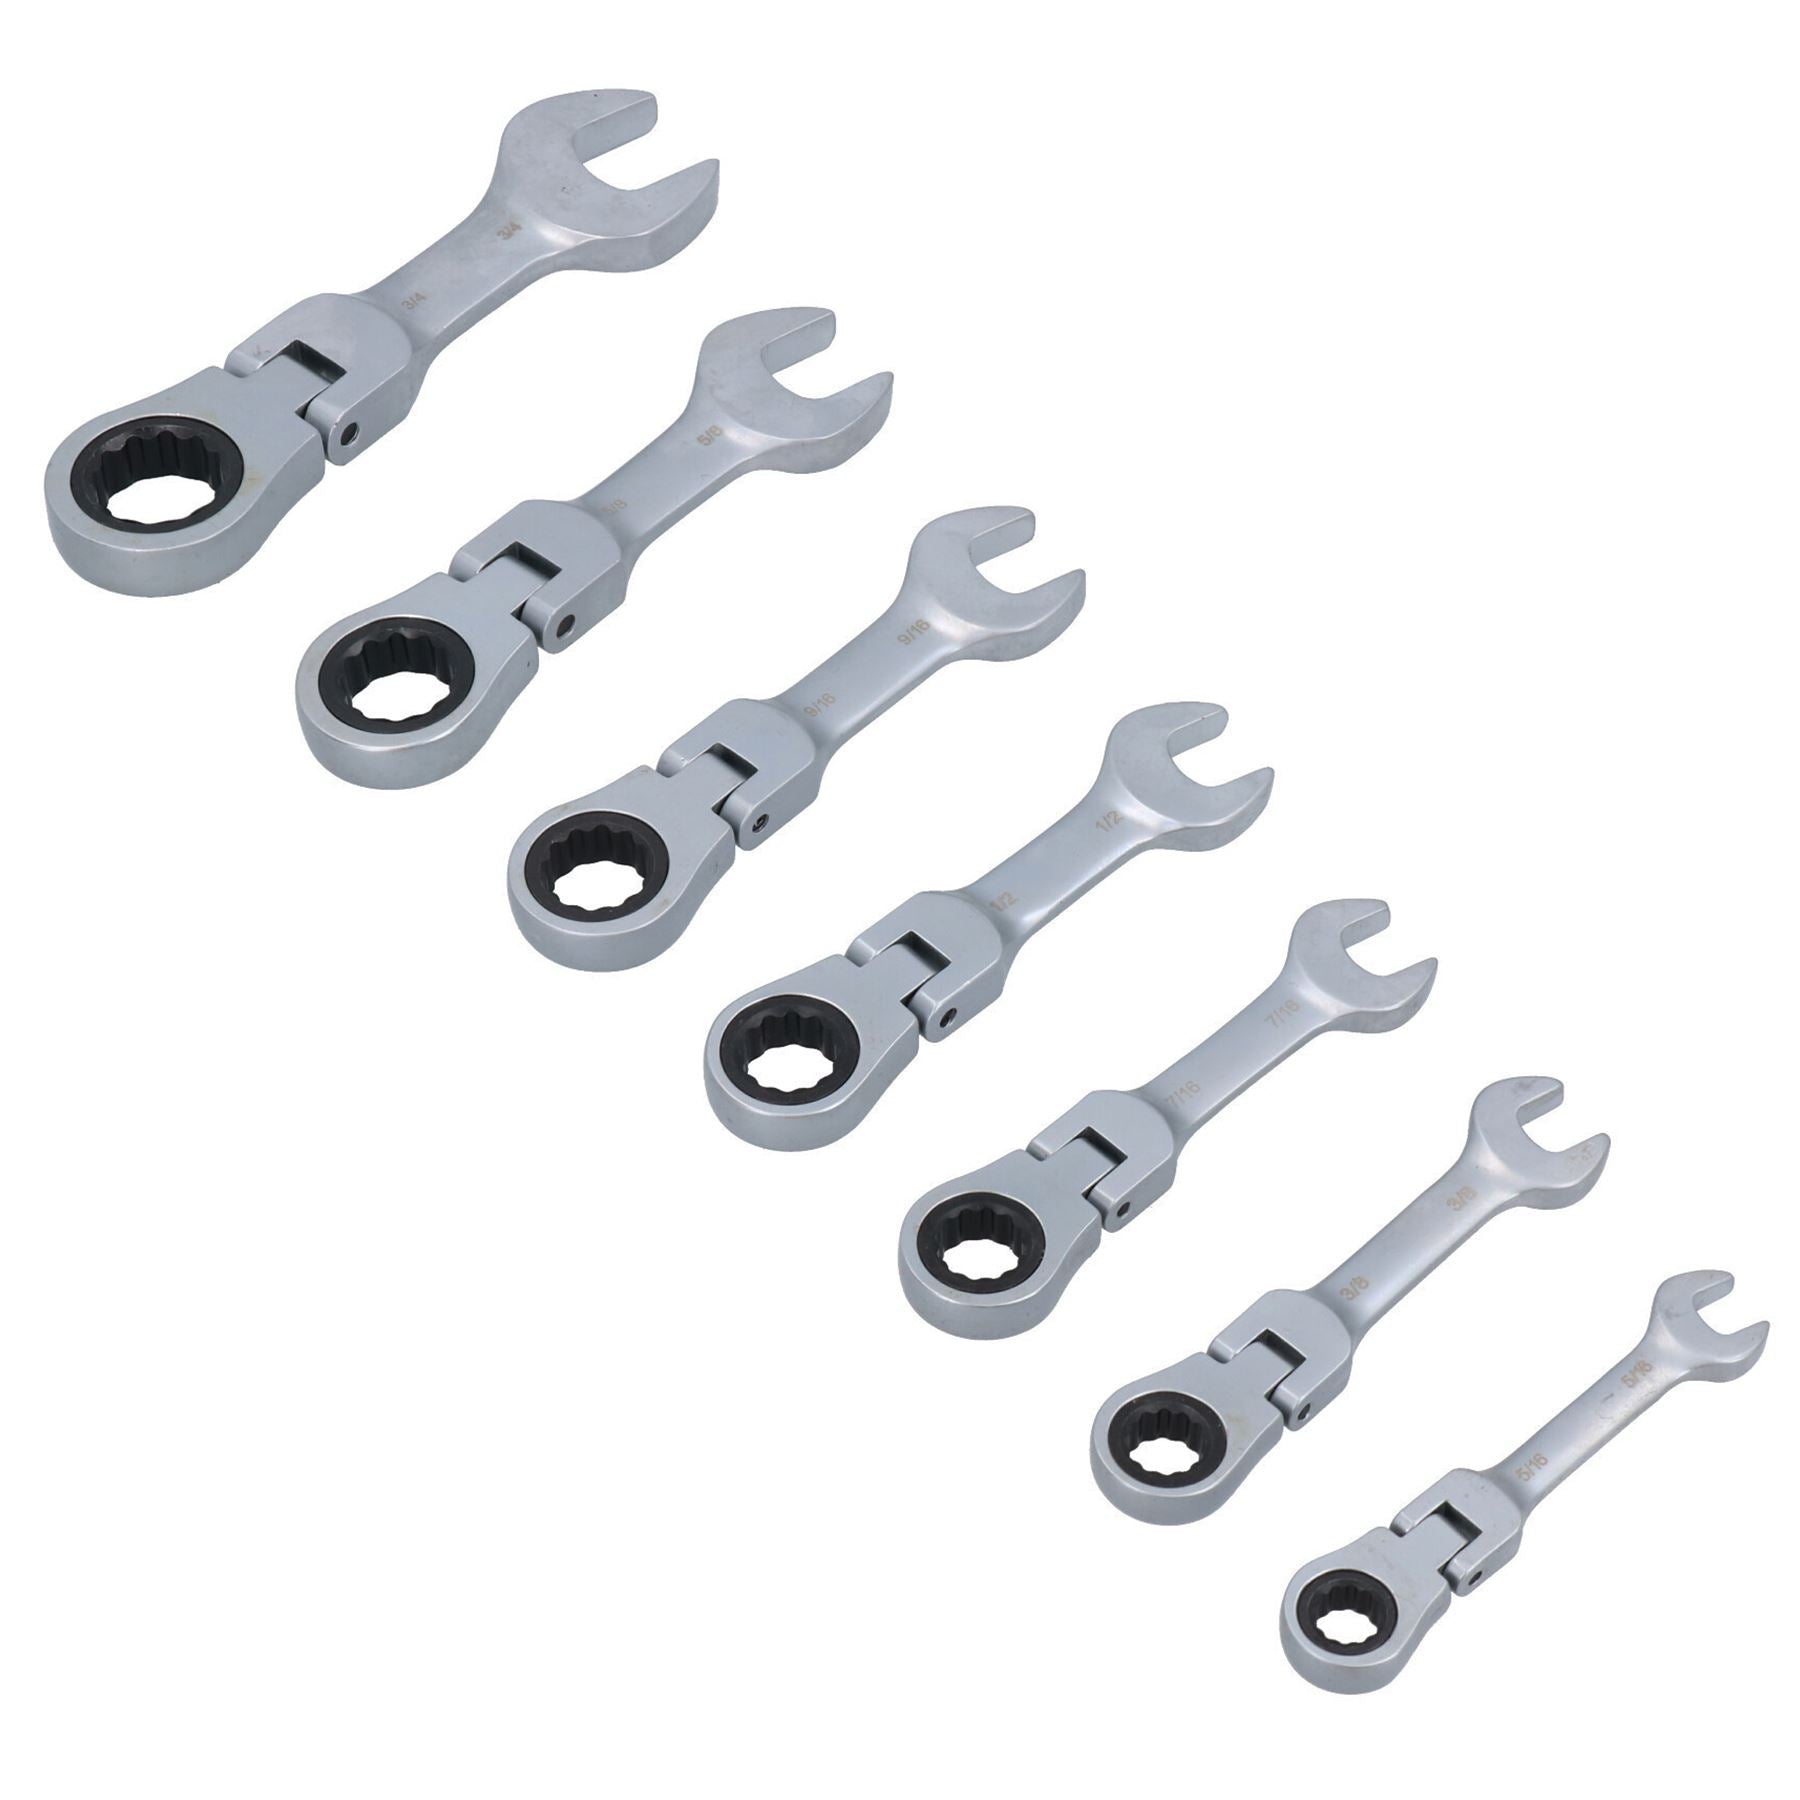 Imperial SAE AF Stubby Flexi Headed Ratchet Spanners Spanner 5/16" - 3/4" 7pc